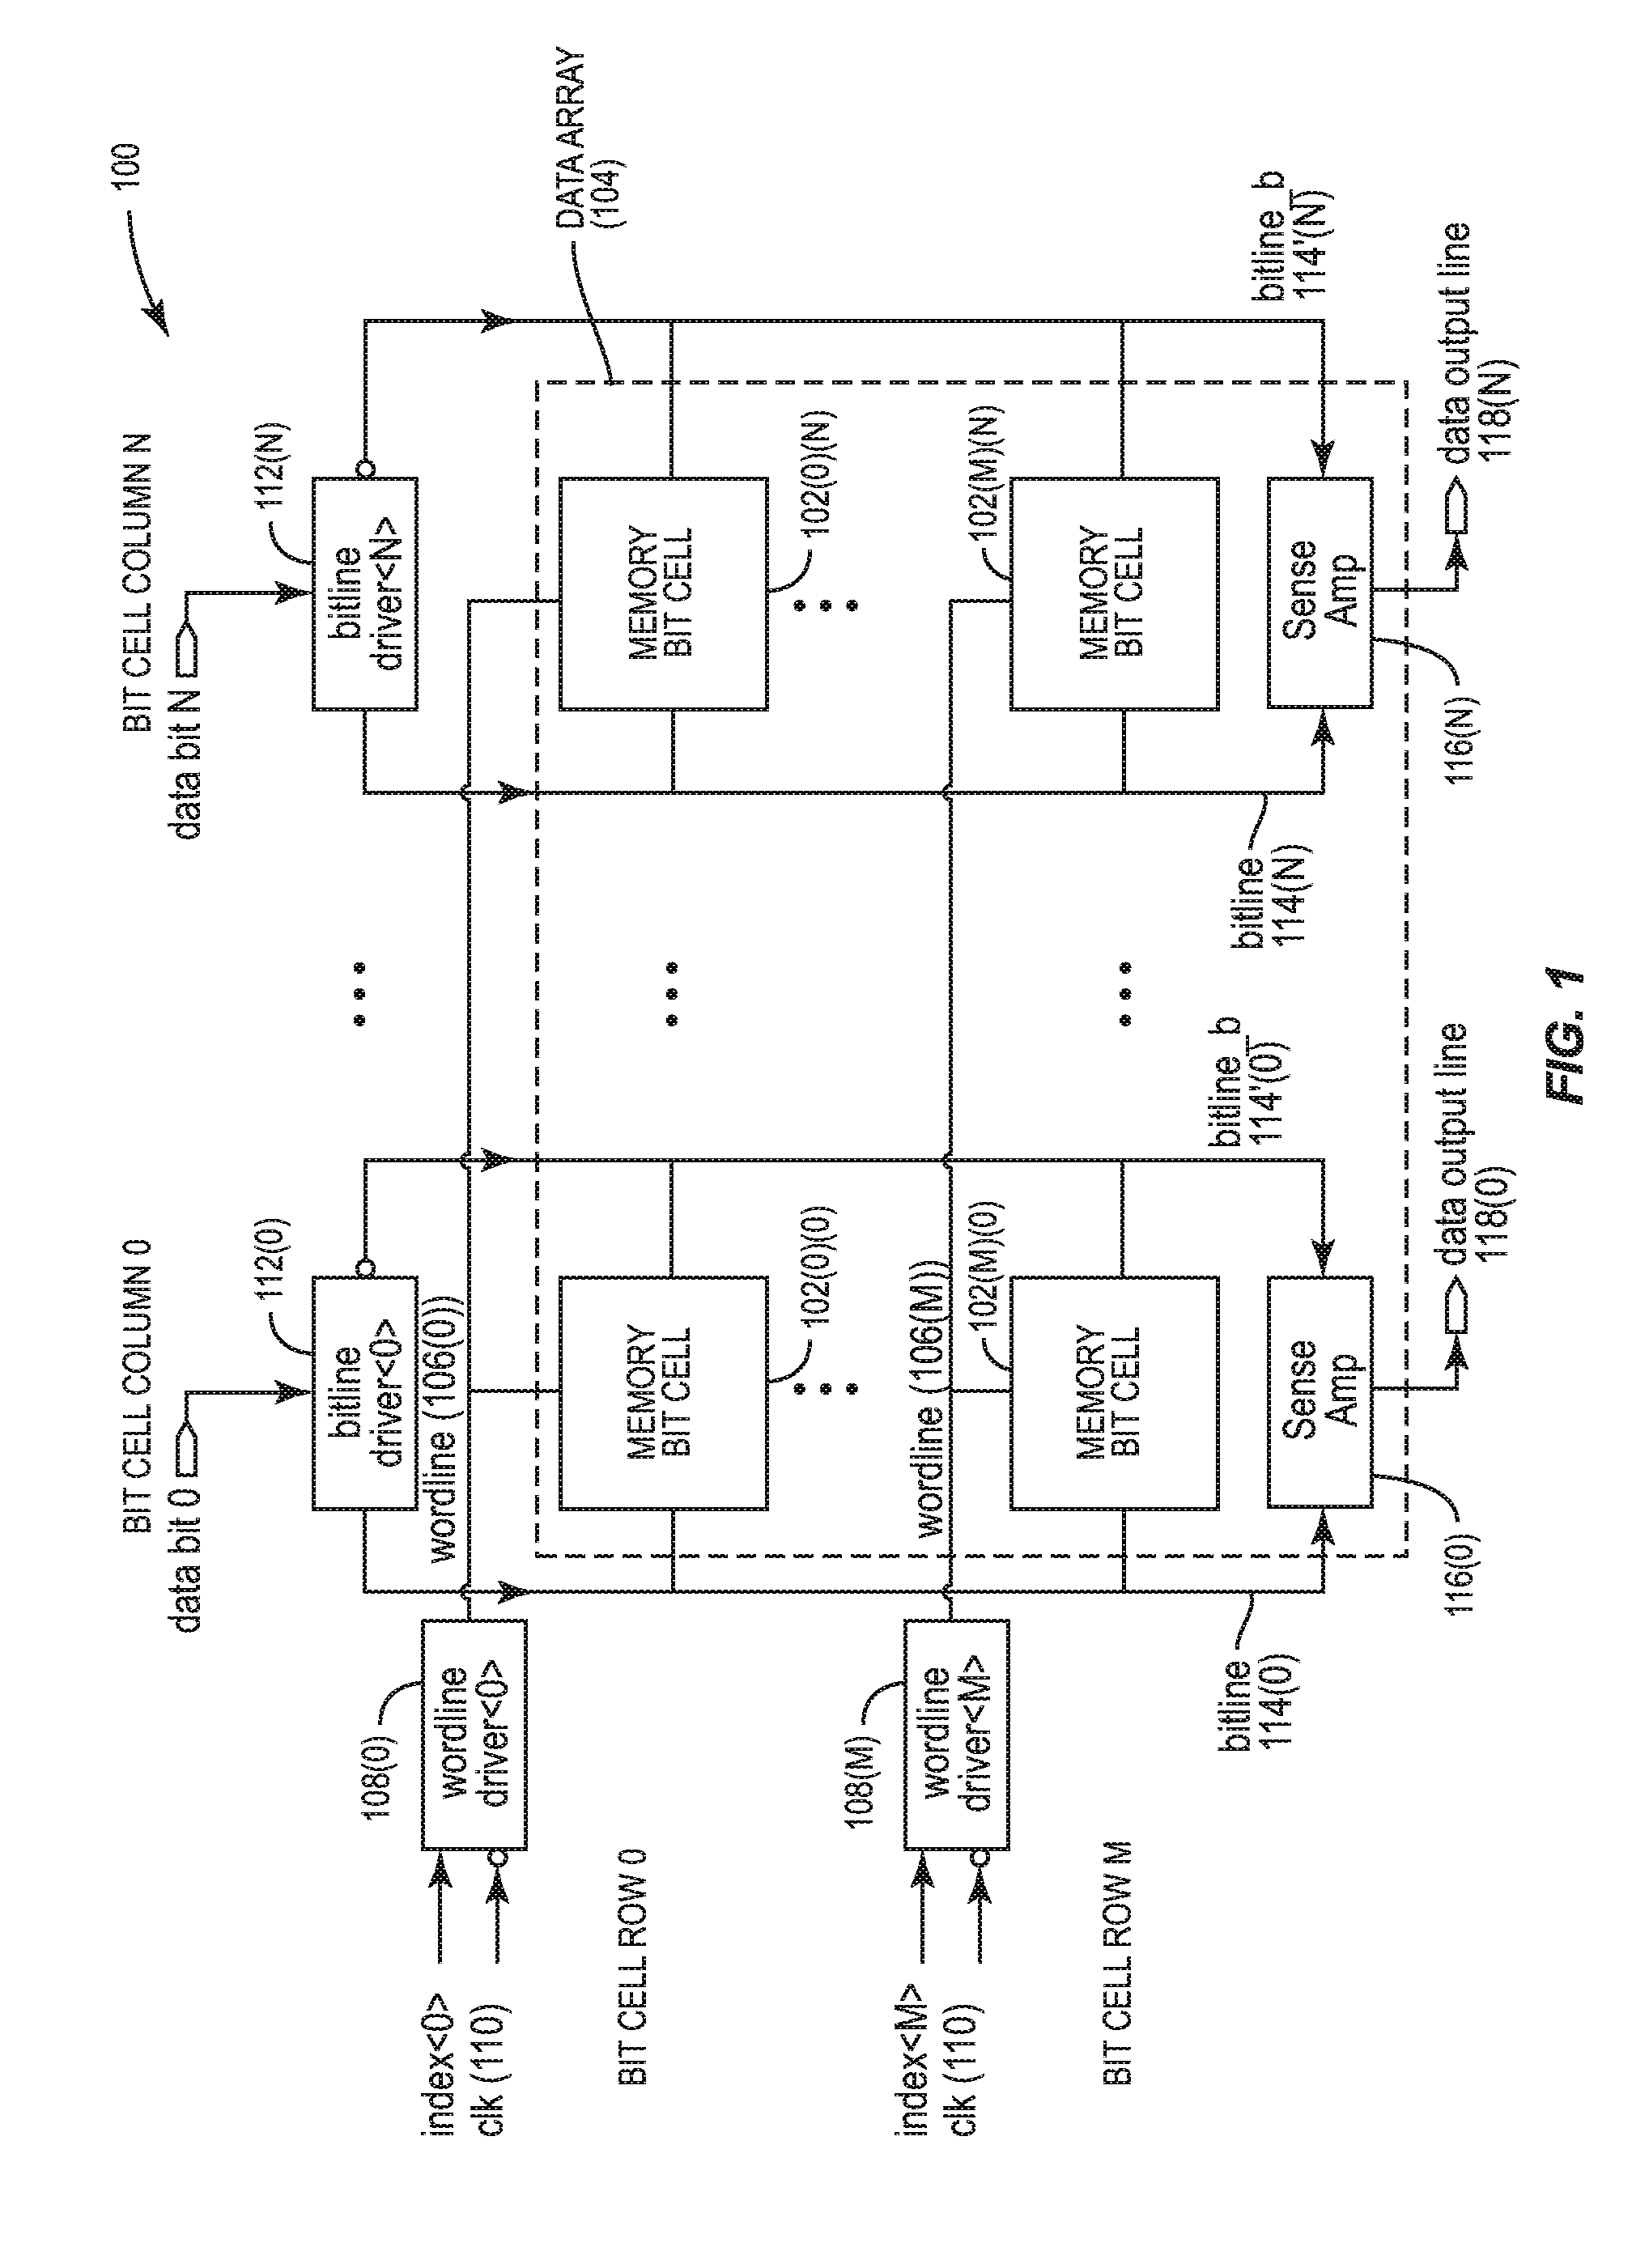 Negative supply rail positive boost write-assist circuits for memory bit cells employing a p-type field-effect transistor (PFET) write port(s), and related systems and methods